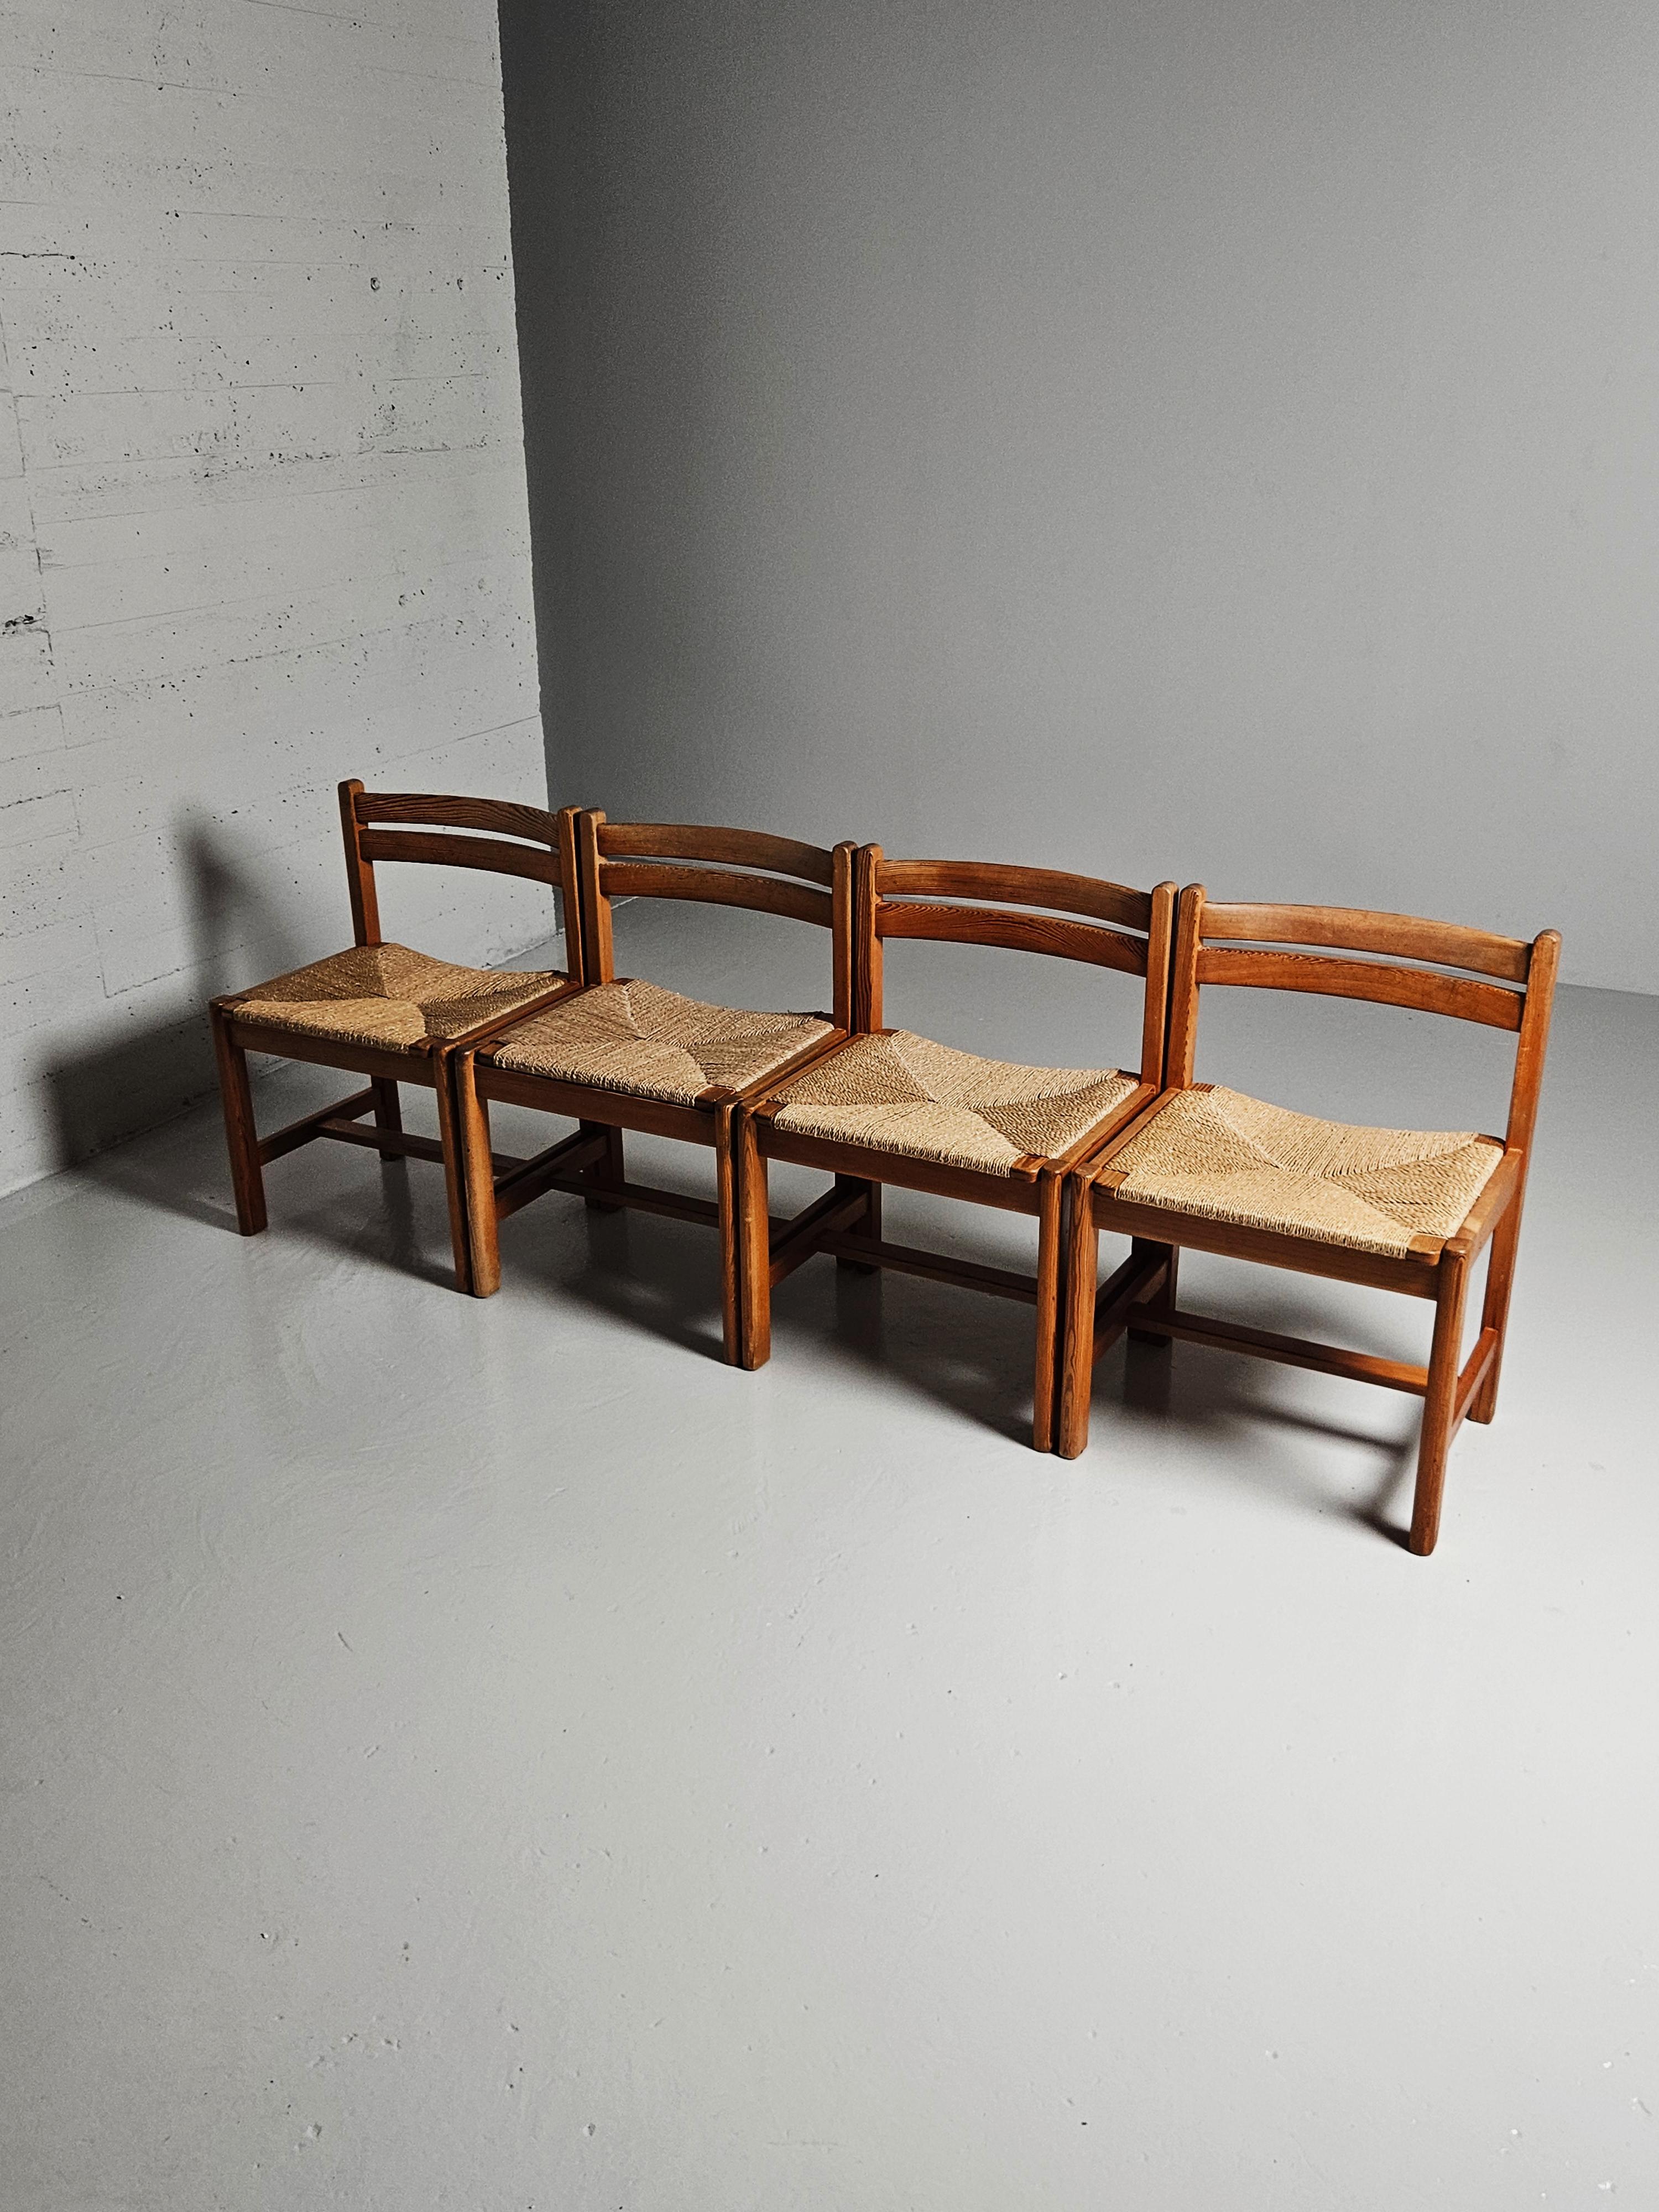 Set of four dining chairs 'Asserbo' designed by Børge Mogensen and produced by the Swedish company Karl Andersson & Söner during the 1960s. 

Made in beautiful pine with woven cord seats. 